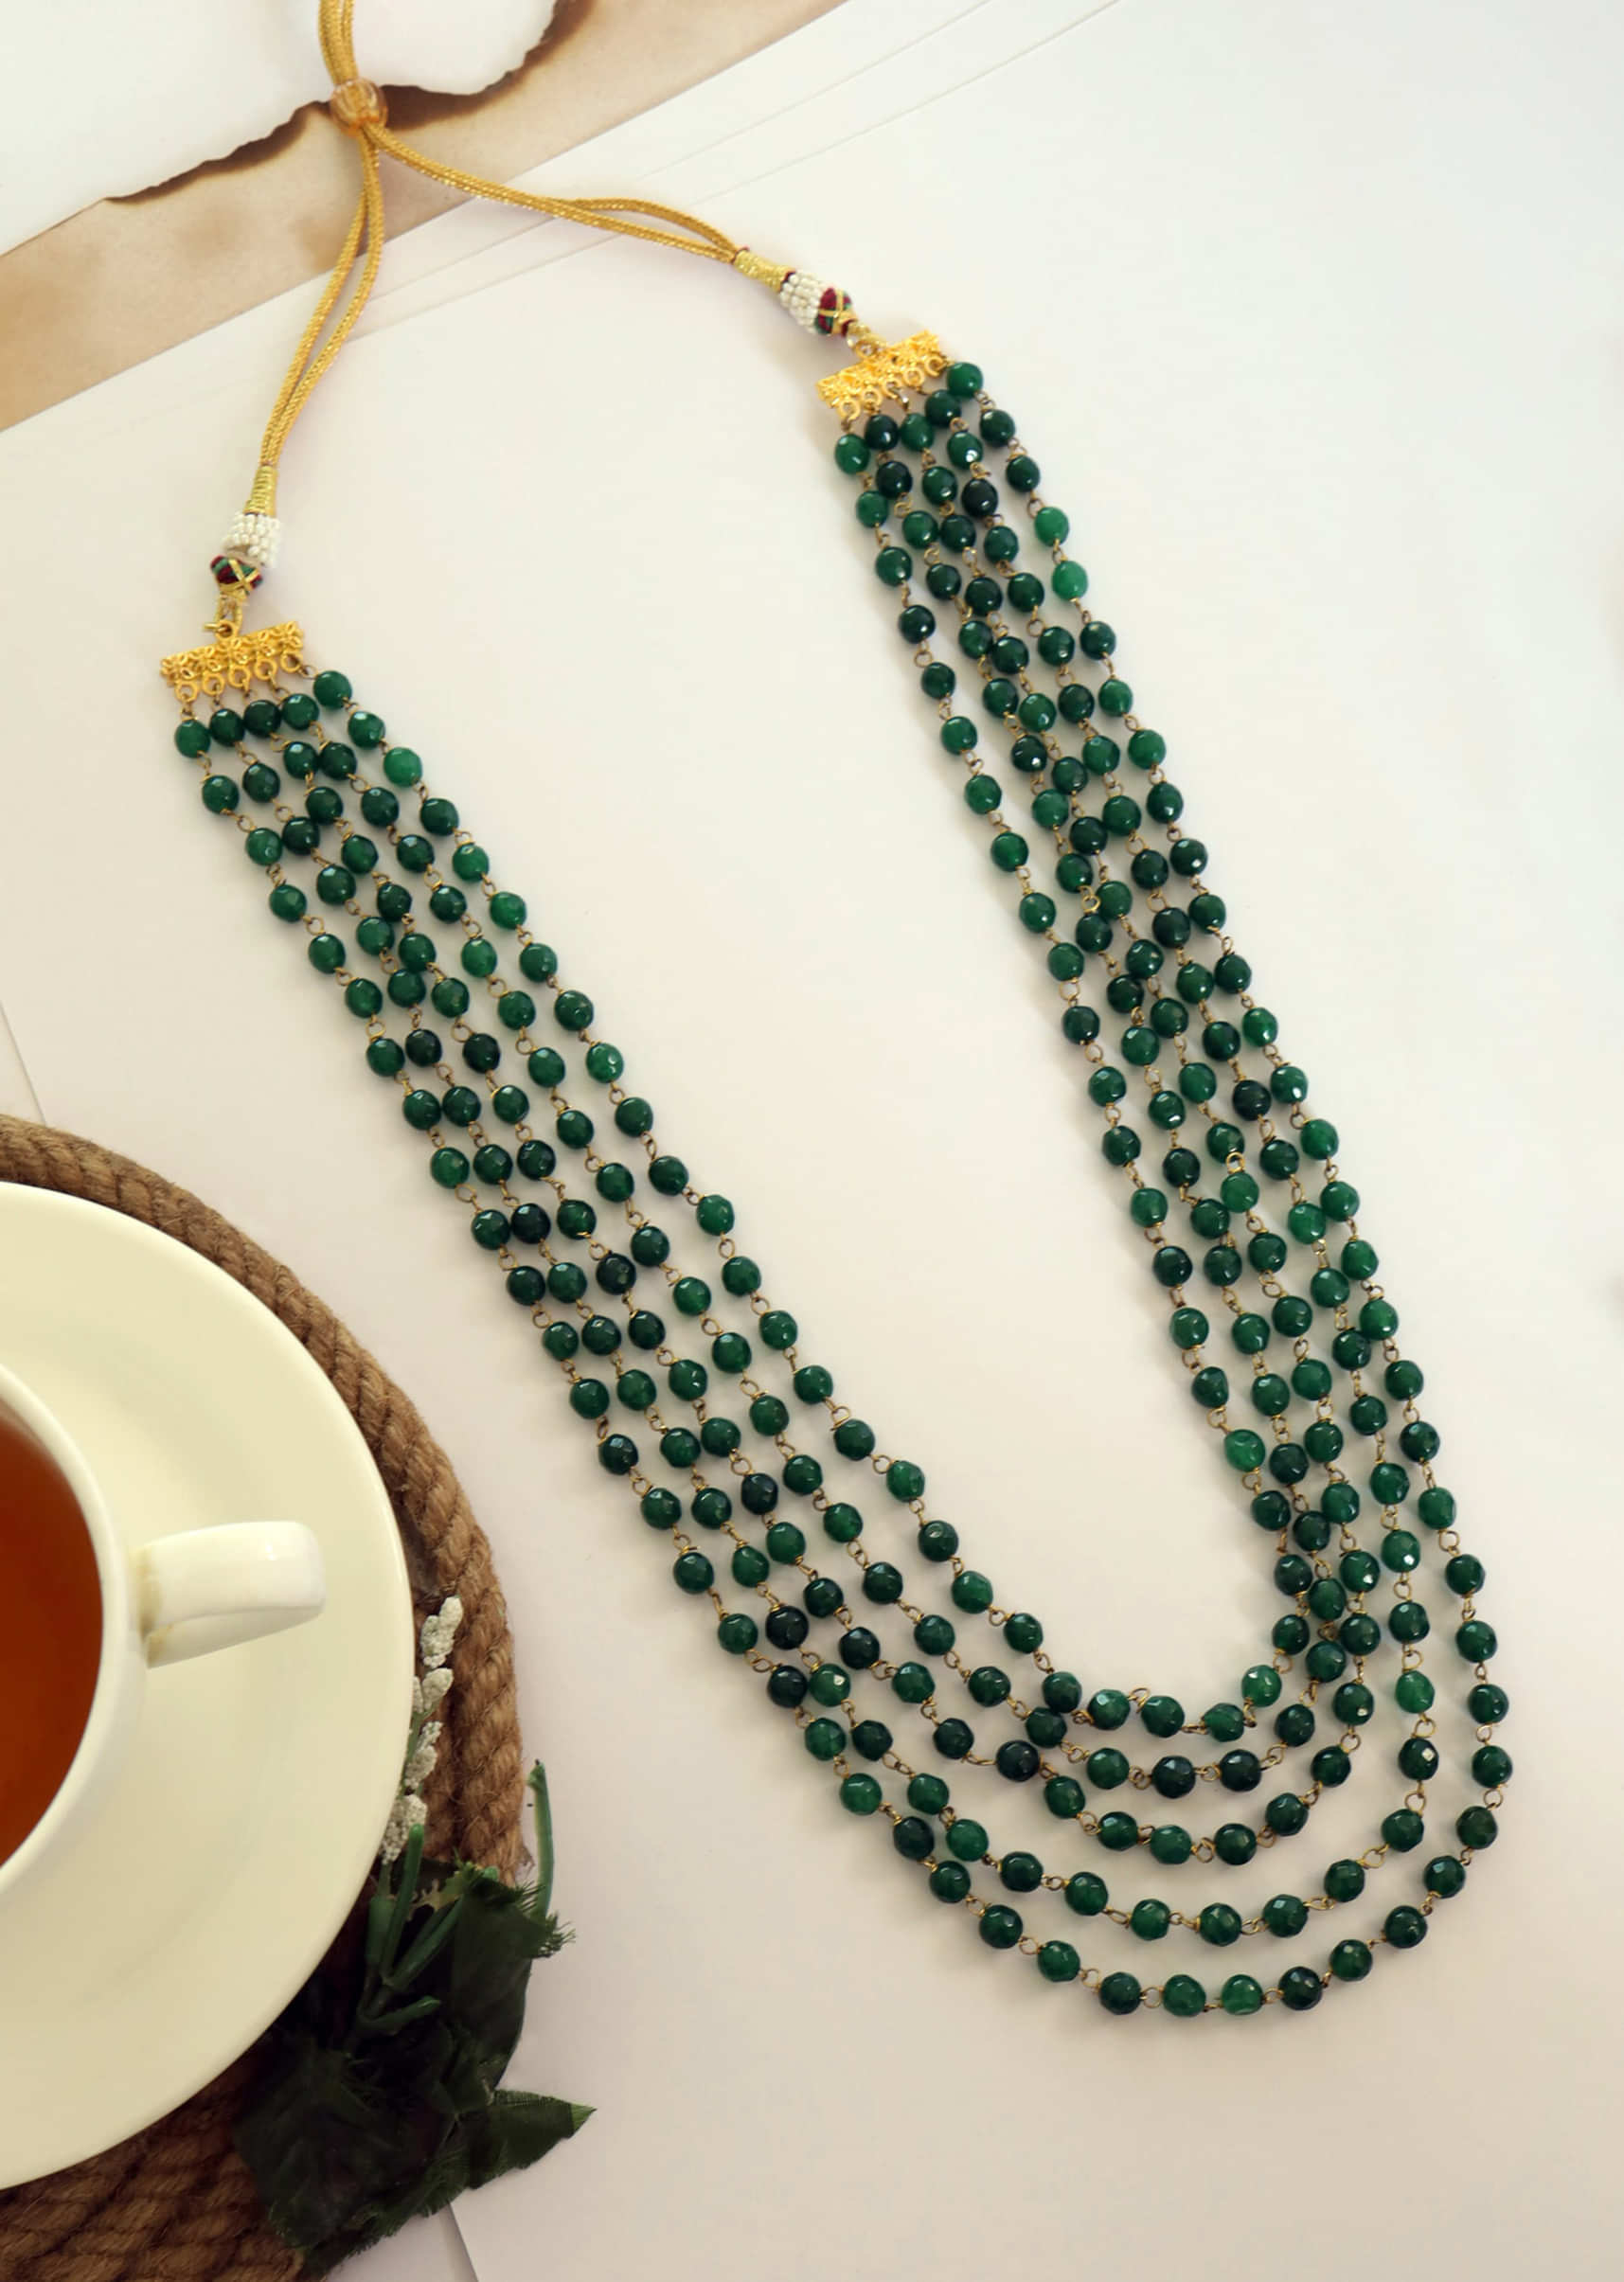 Multi Layered Necklace With Green Jade Stones By Paisley Pop